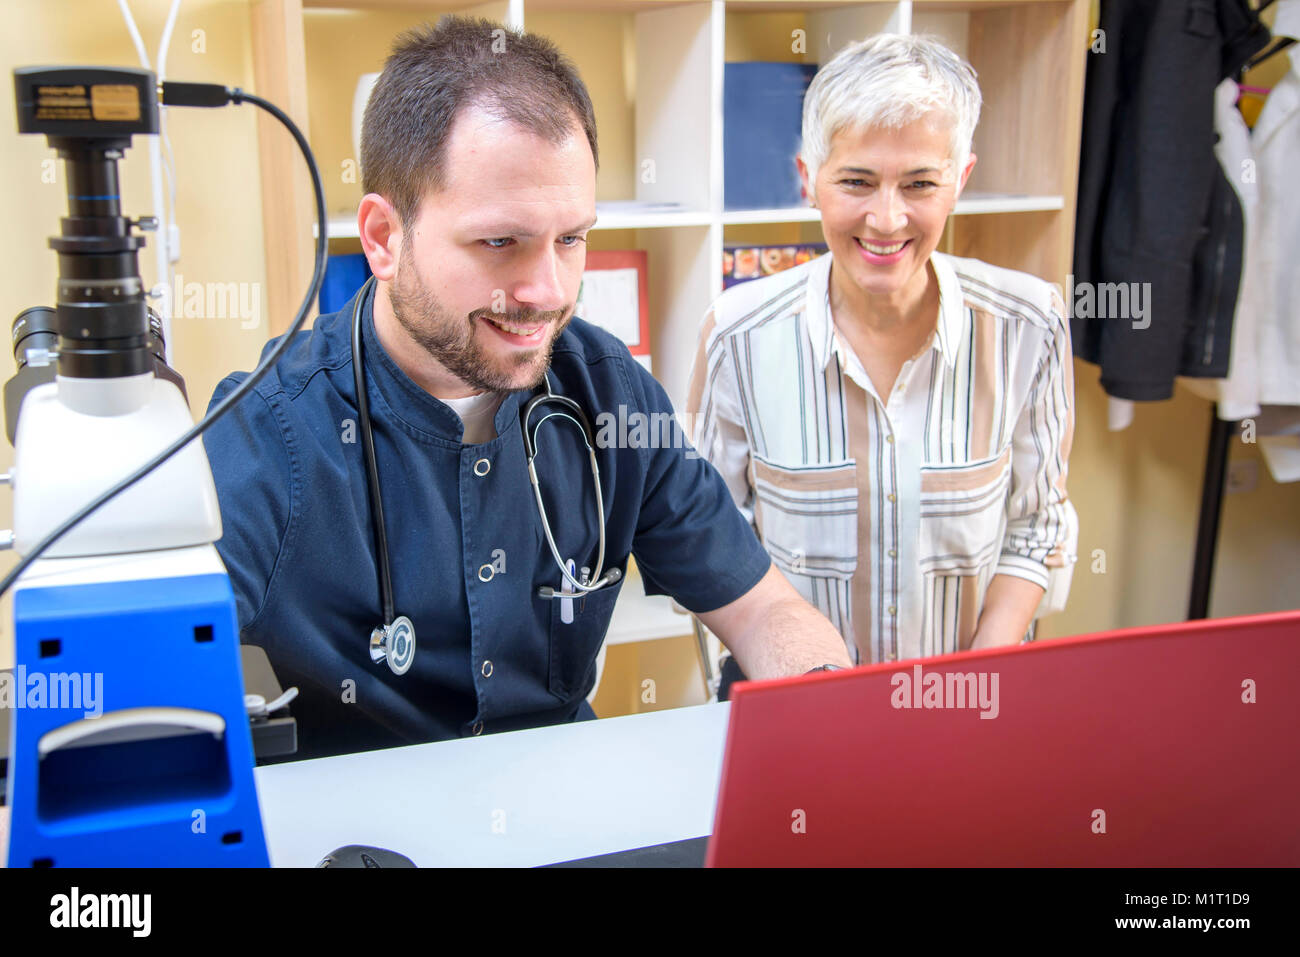 Elderly woman with a doctor, getting some health advice Stock Photo